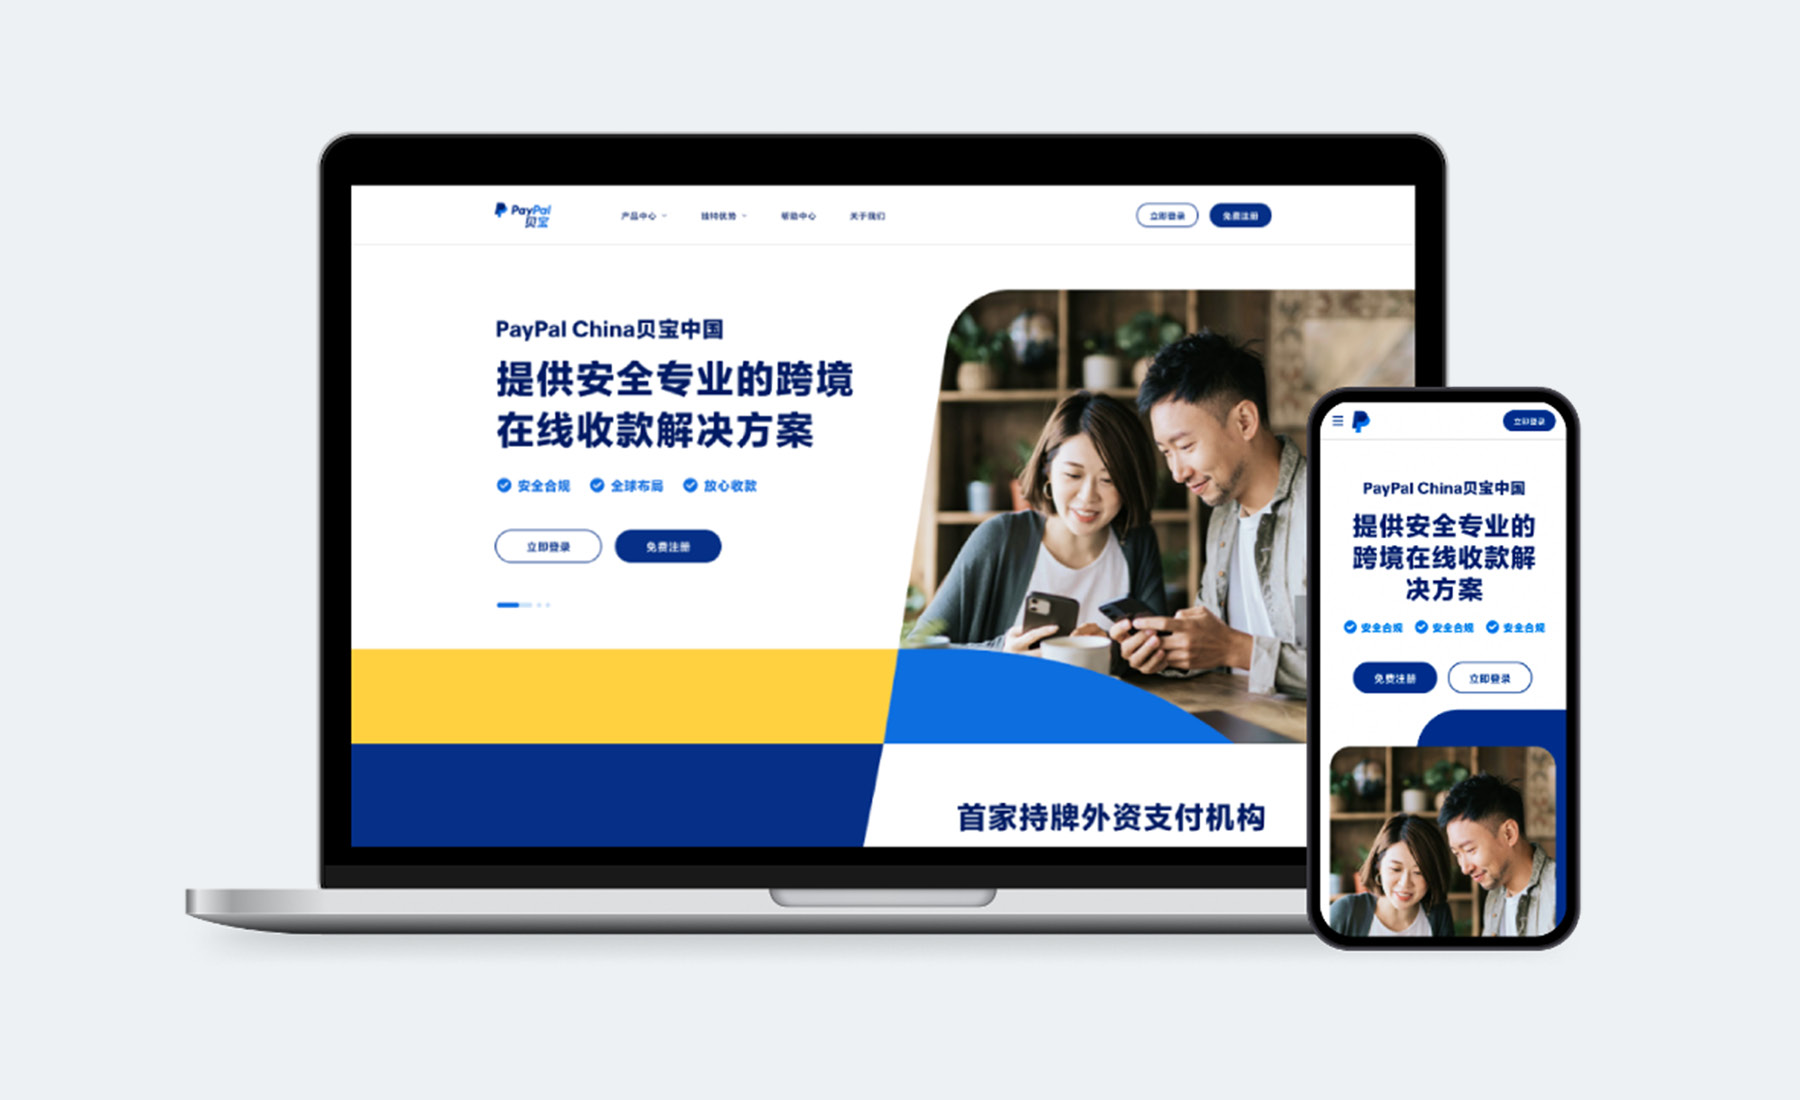 Mockup of PayPal China website on a laptop and smart phone